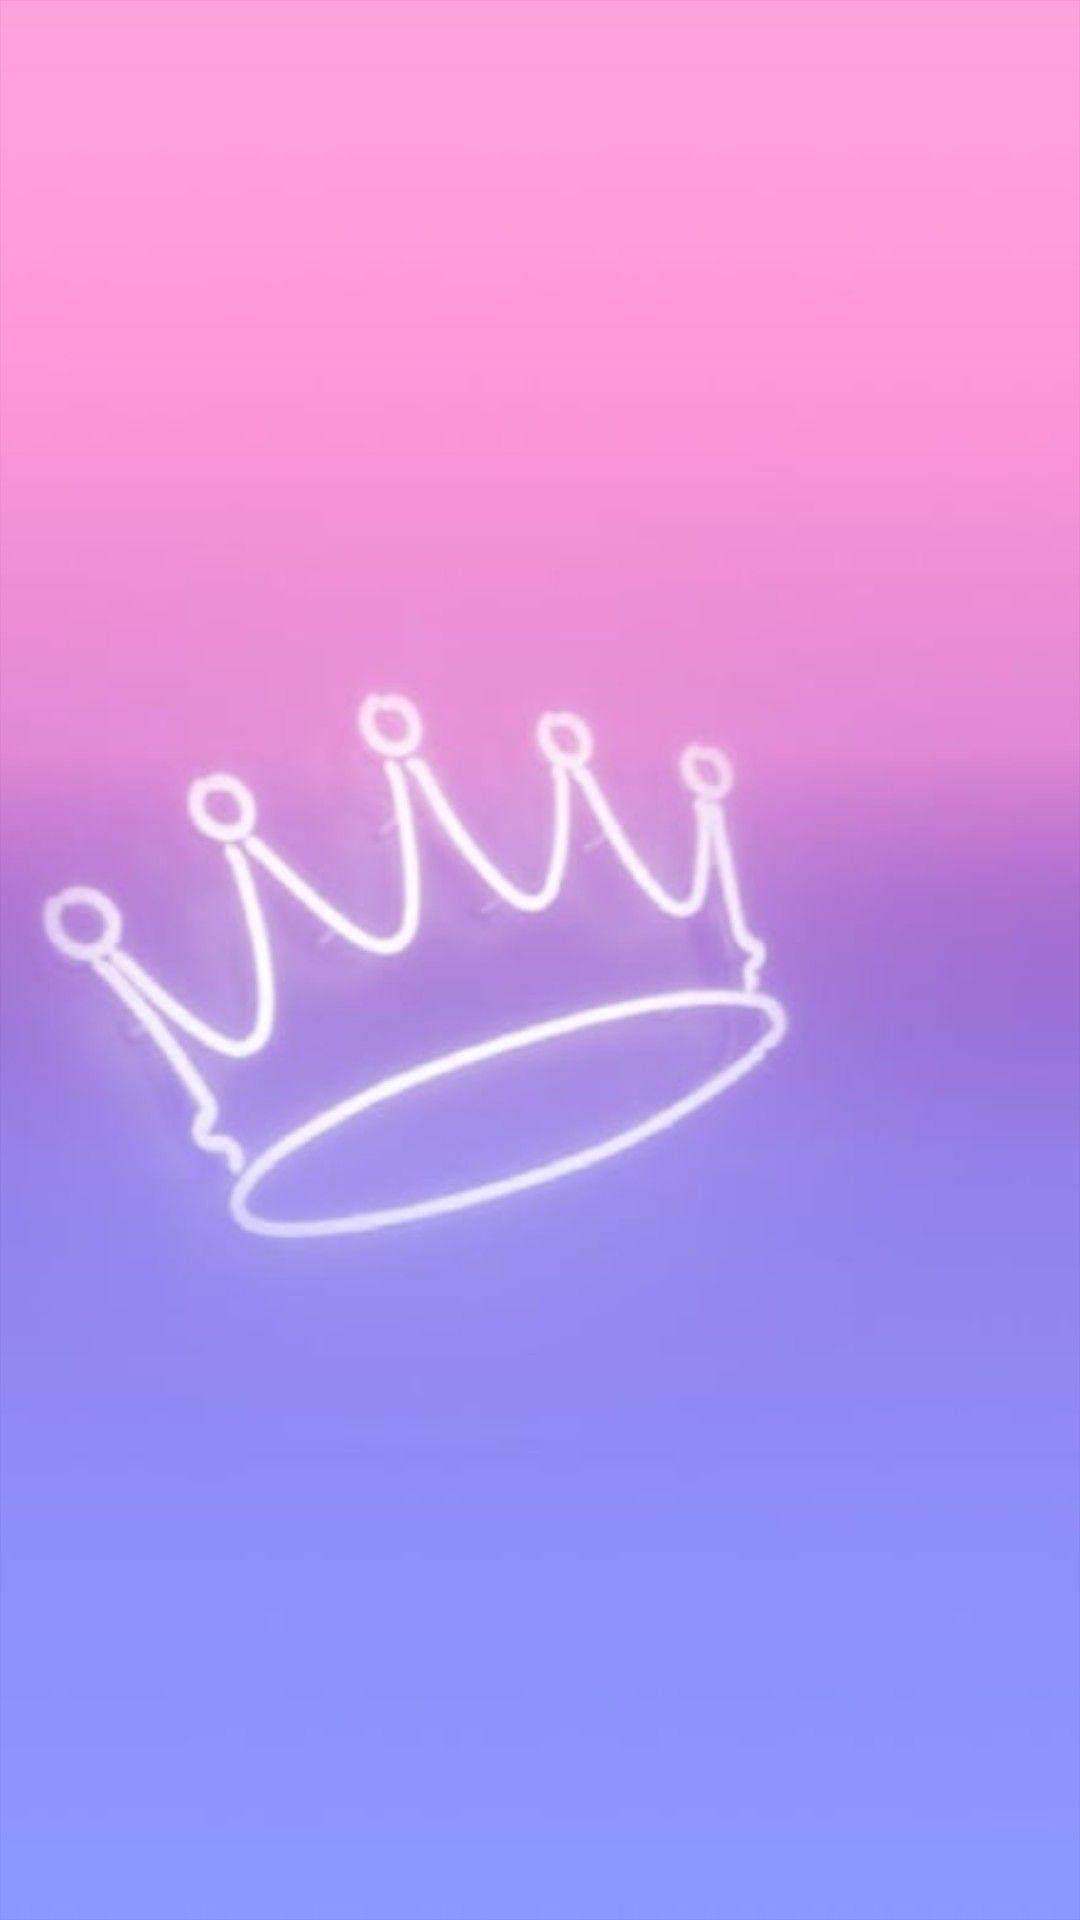 Neon Crown iPhone 8 wallpaper with high-resolution 1080x1920 pixel. You can use this wallpaper for your iPhone 8, iPhone 8 Plus, iPhone X, XS, XS Max, XR, 11, 11 Pro, 11 Pro Max home screen background, lock screen, Instagram story, Snapchat or use wallpaper. - Crown, bisexual